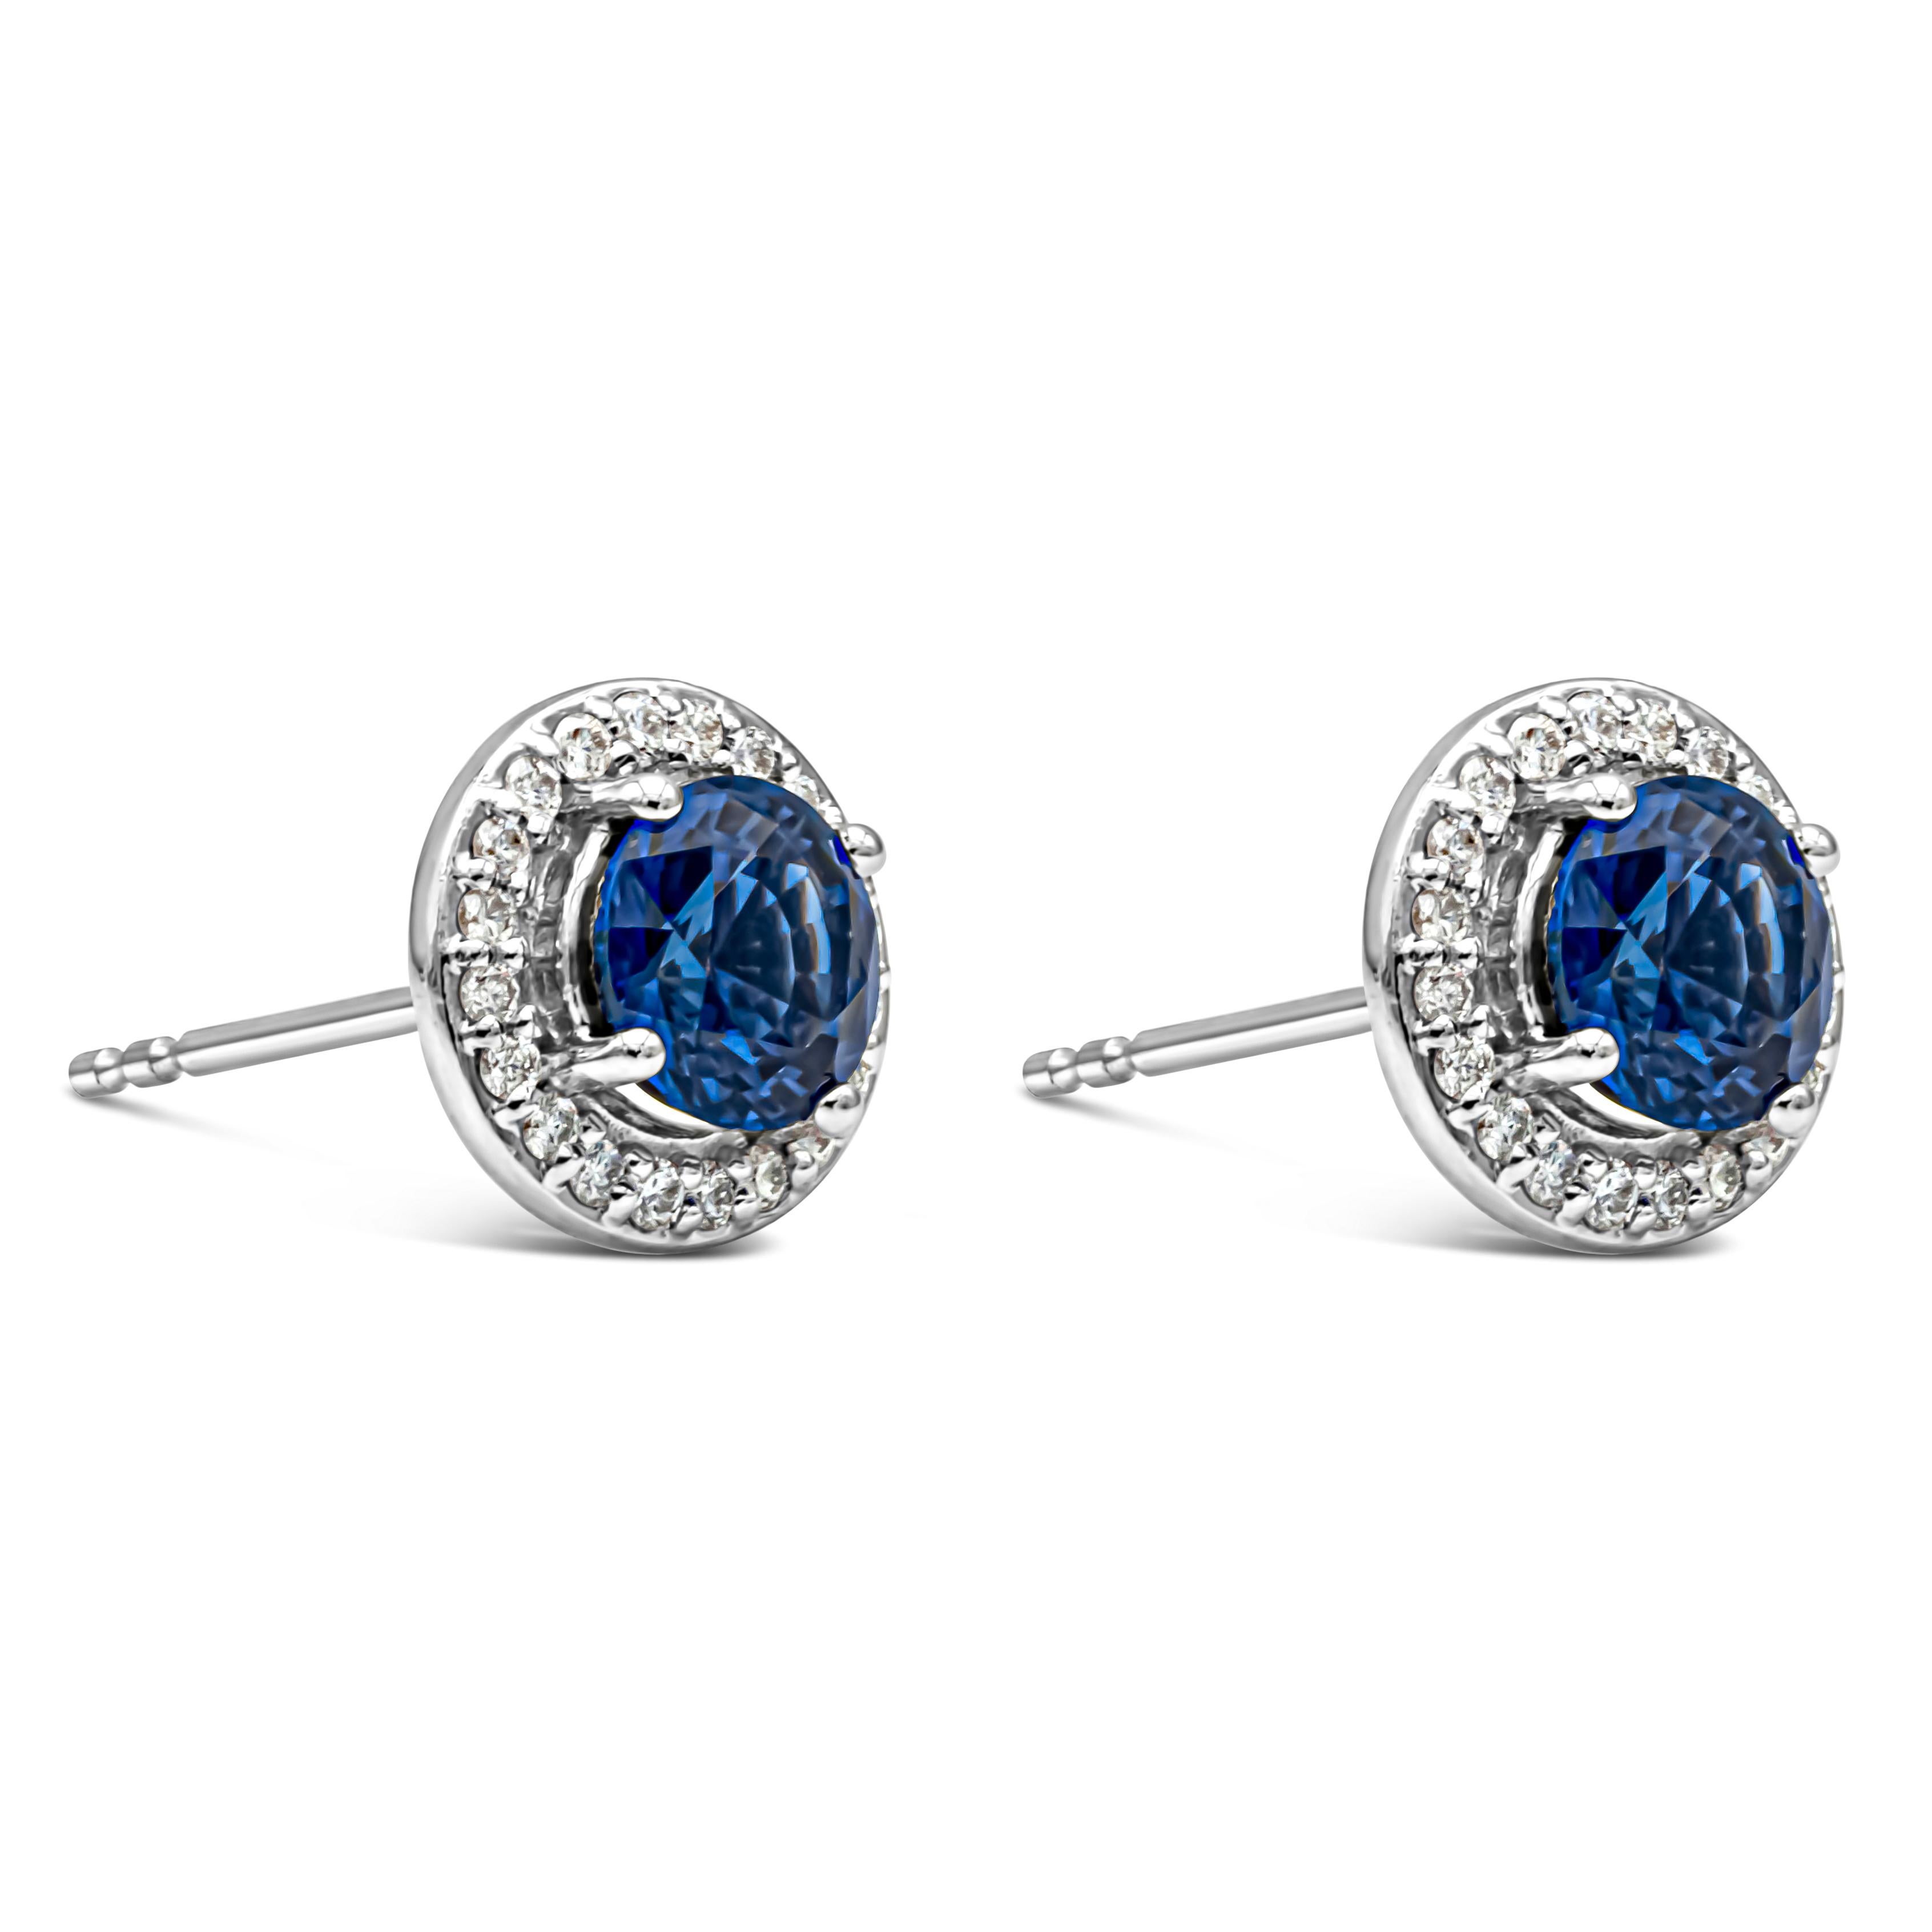 A simple and versatile pair of stud earrings showcasing 1.52 carats total round cut royal blue sapphires, set in a four prong basket setting. Surrounded by a single row of brilliant round diamonds weighing 0.21 carats total, F Color and VS in